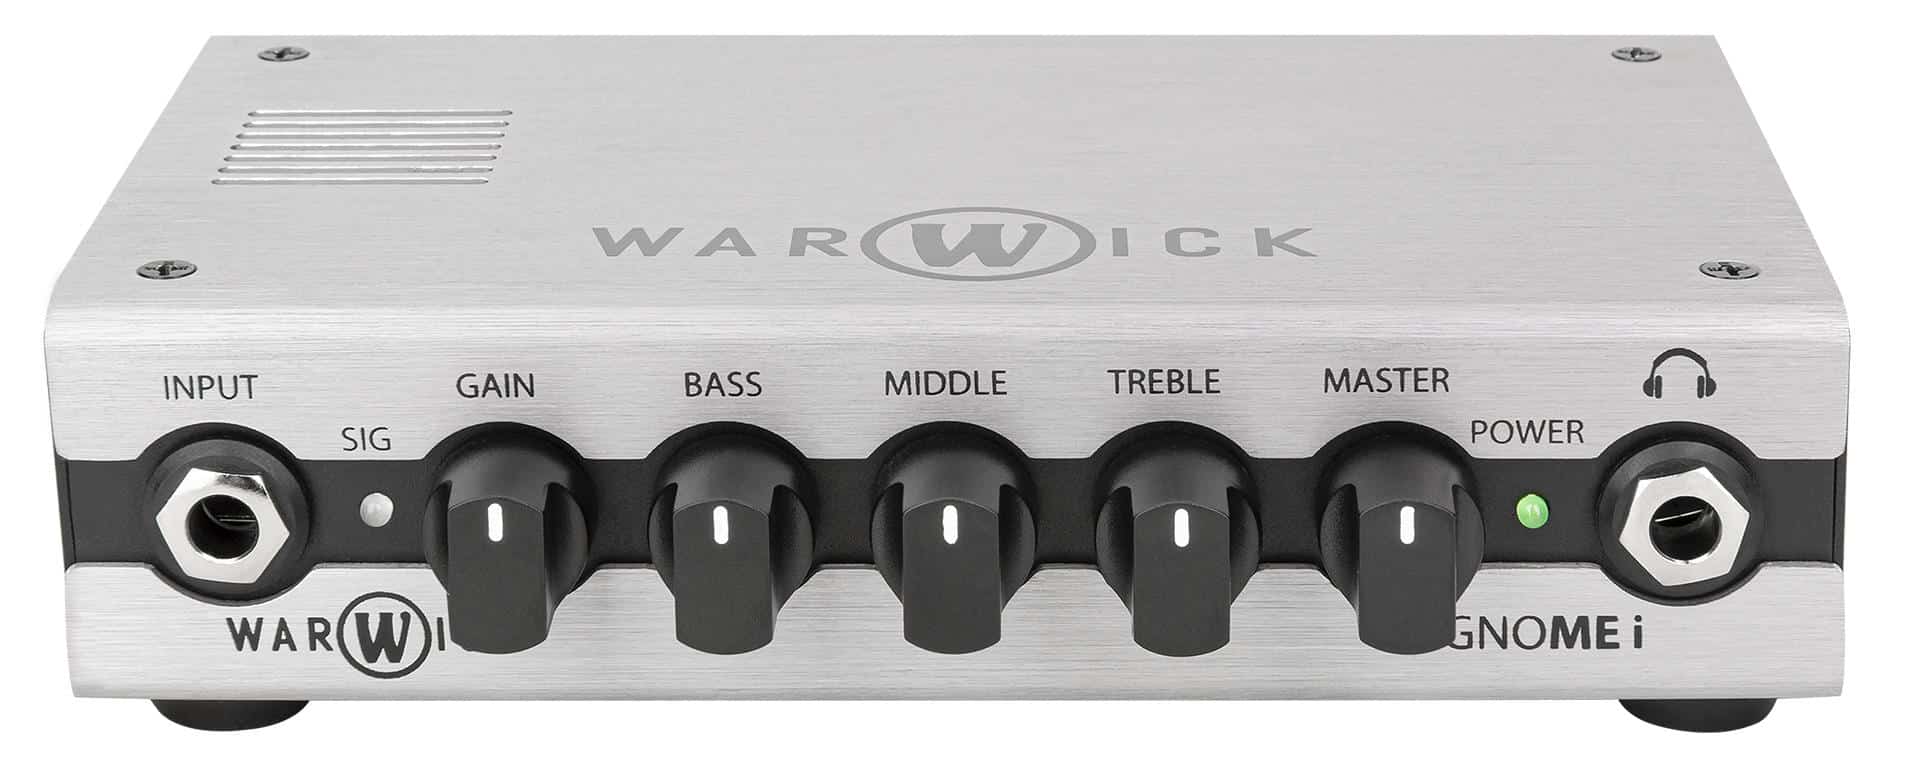 Warwick’s Versatile New Gnome Bass Amp Head Delivers 200 Watts And Weighs Only Two Pounds